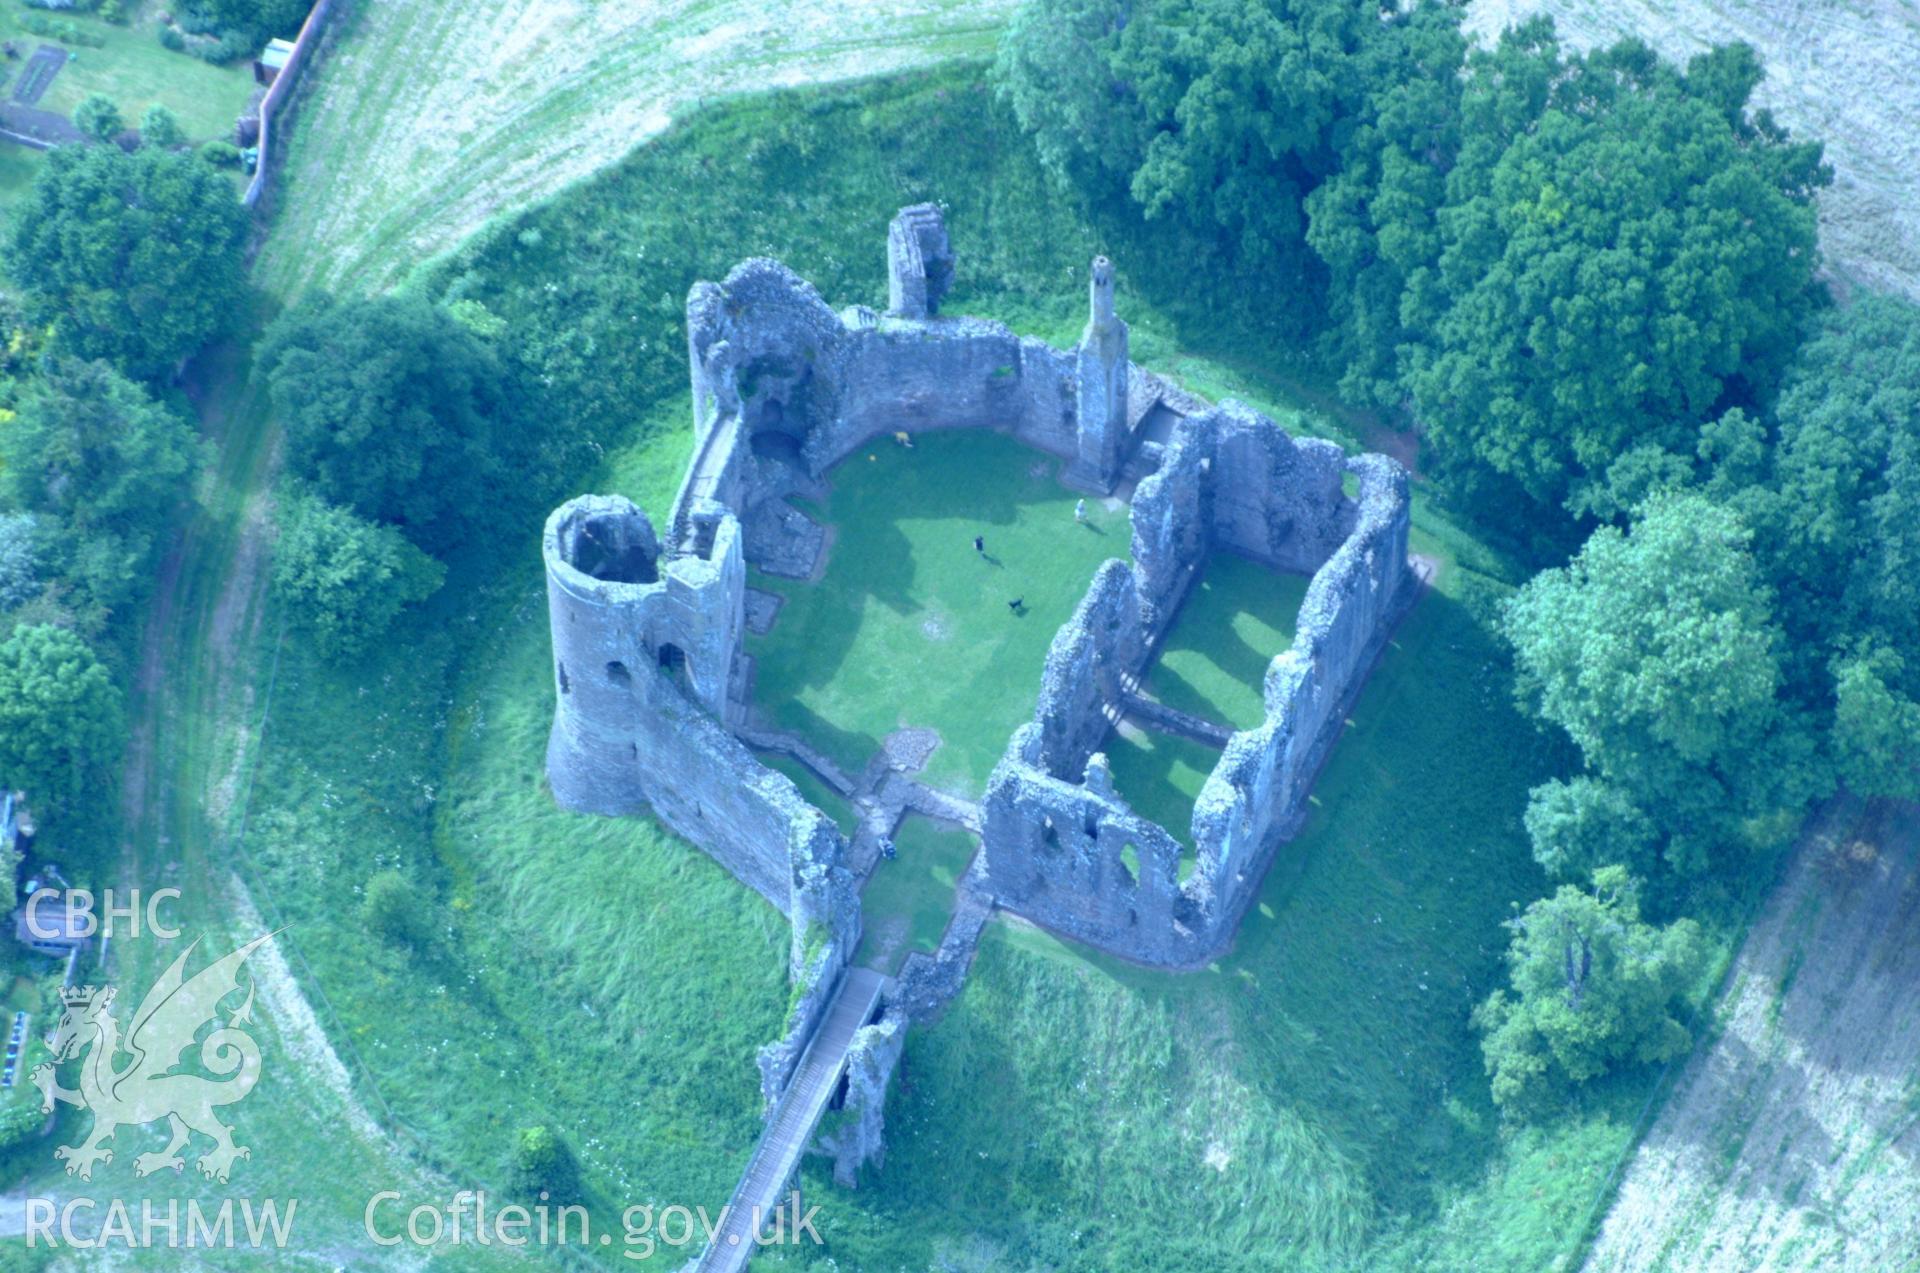 RCAHMW colour oblique aerial photograph of Grosmont castle taken on 02/06/2004 by Toby Driver